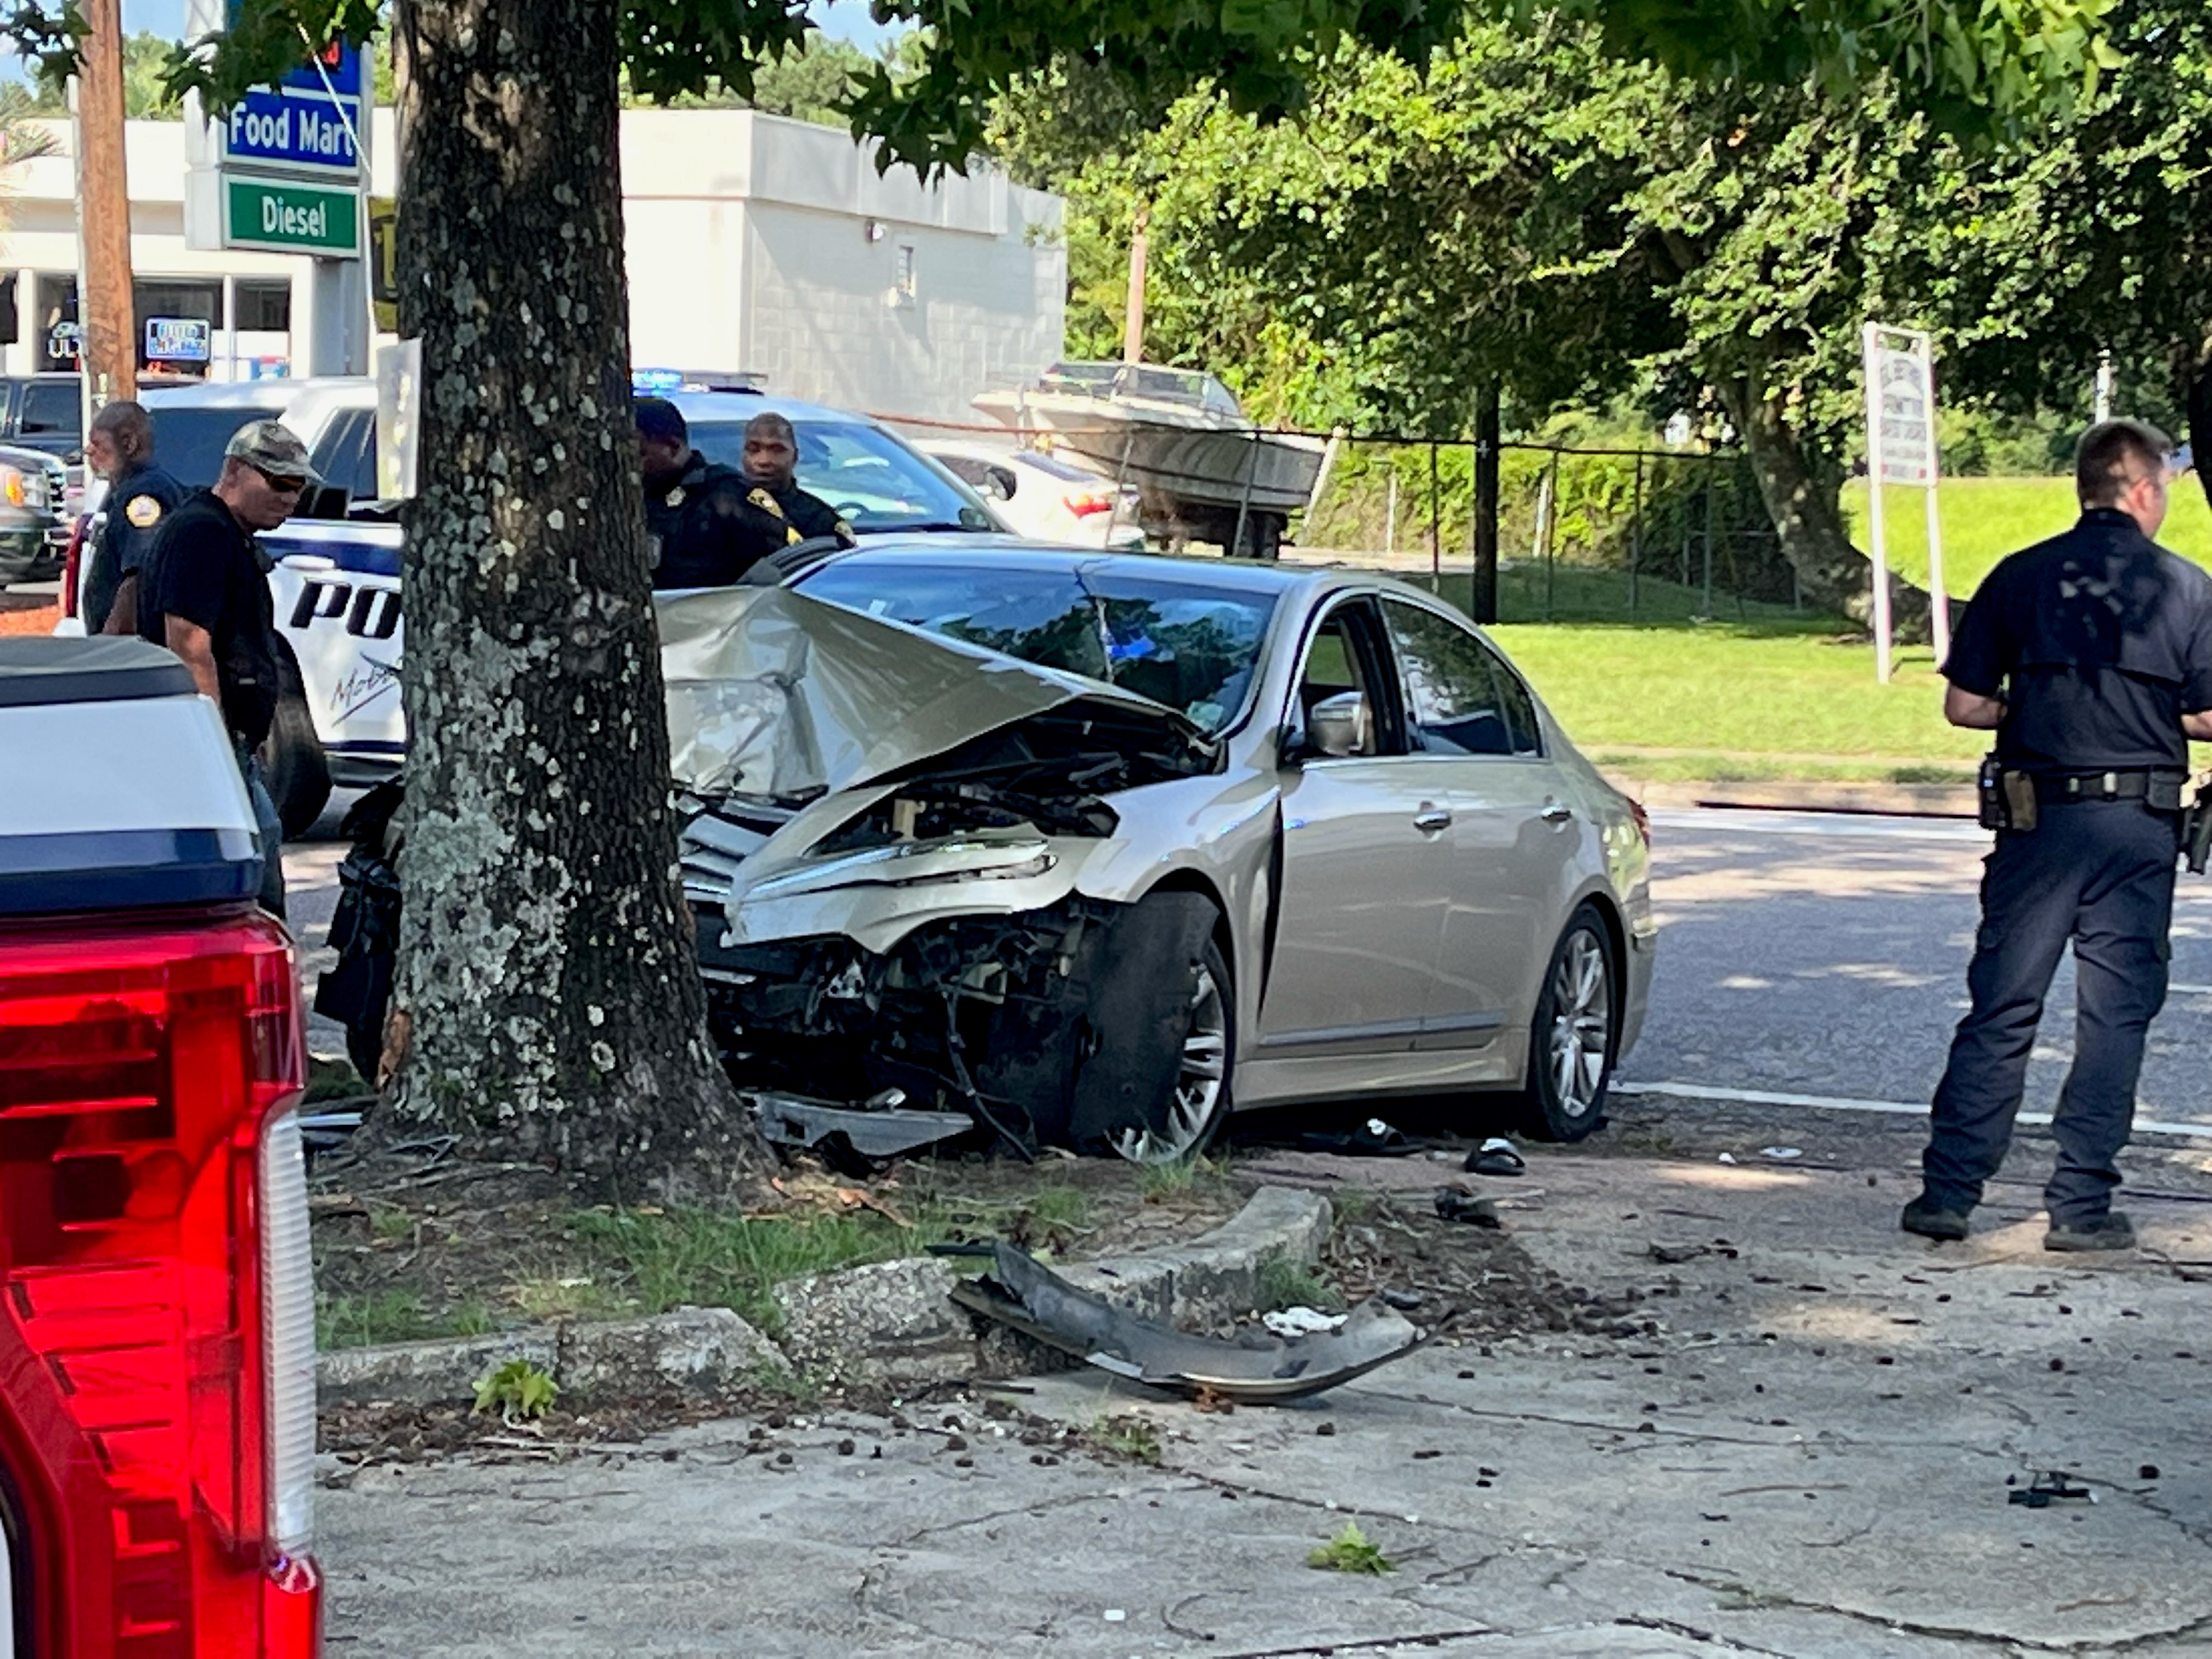 Teen crashes car after high-speed chase in Eau Claire, Daily Updates